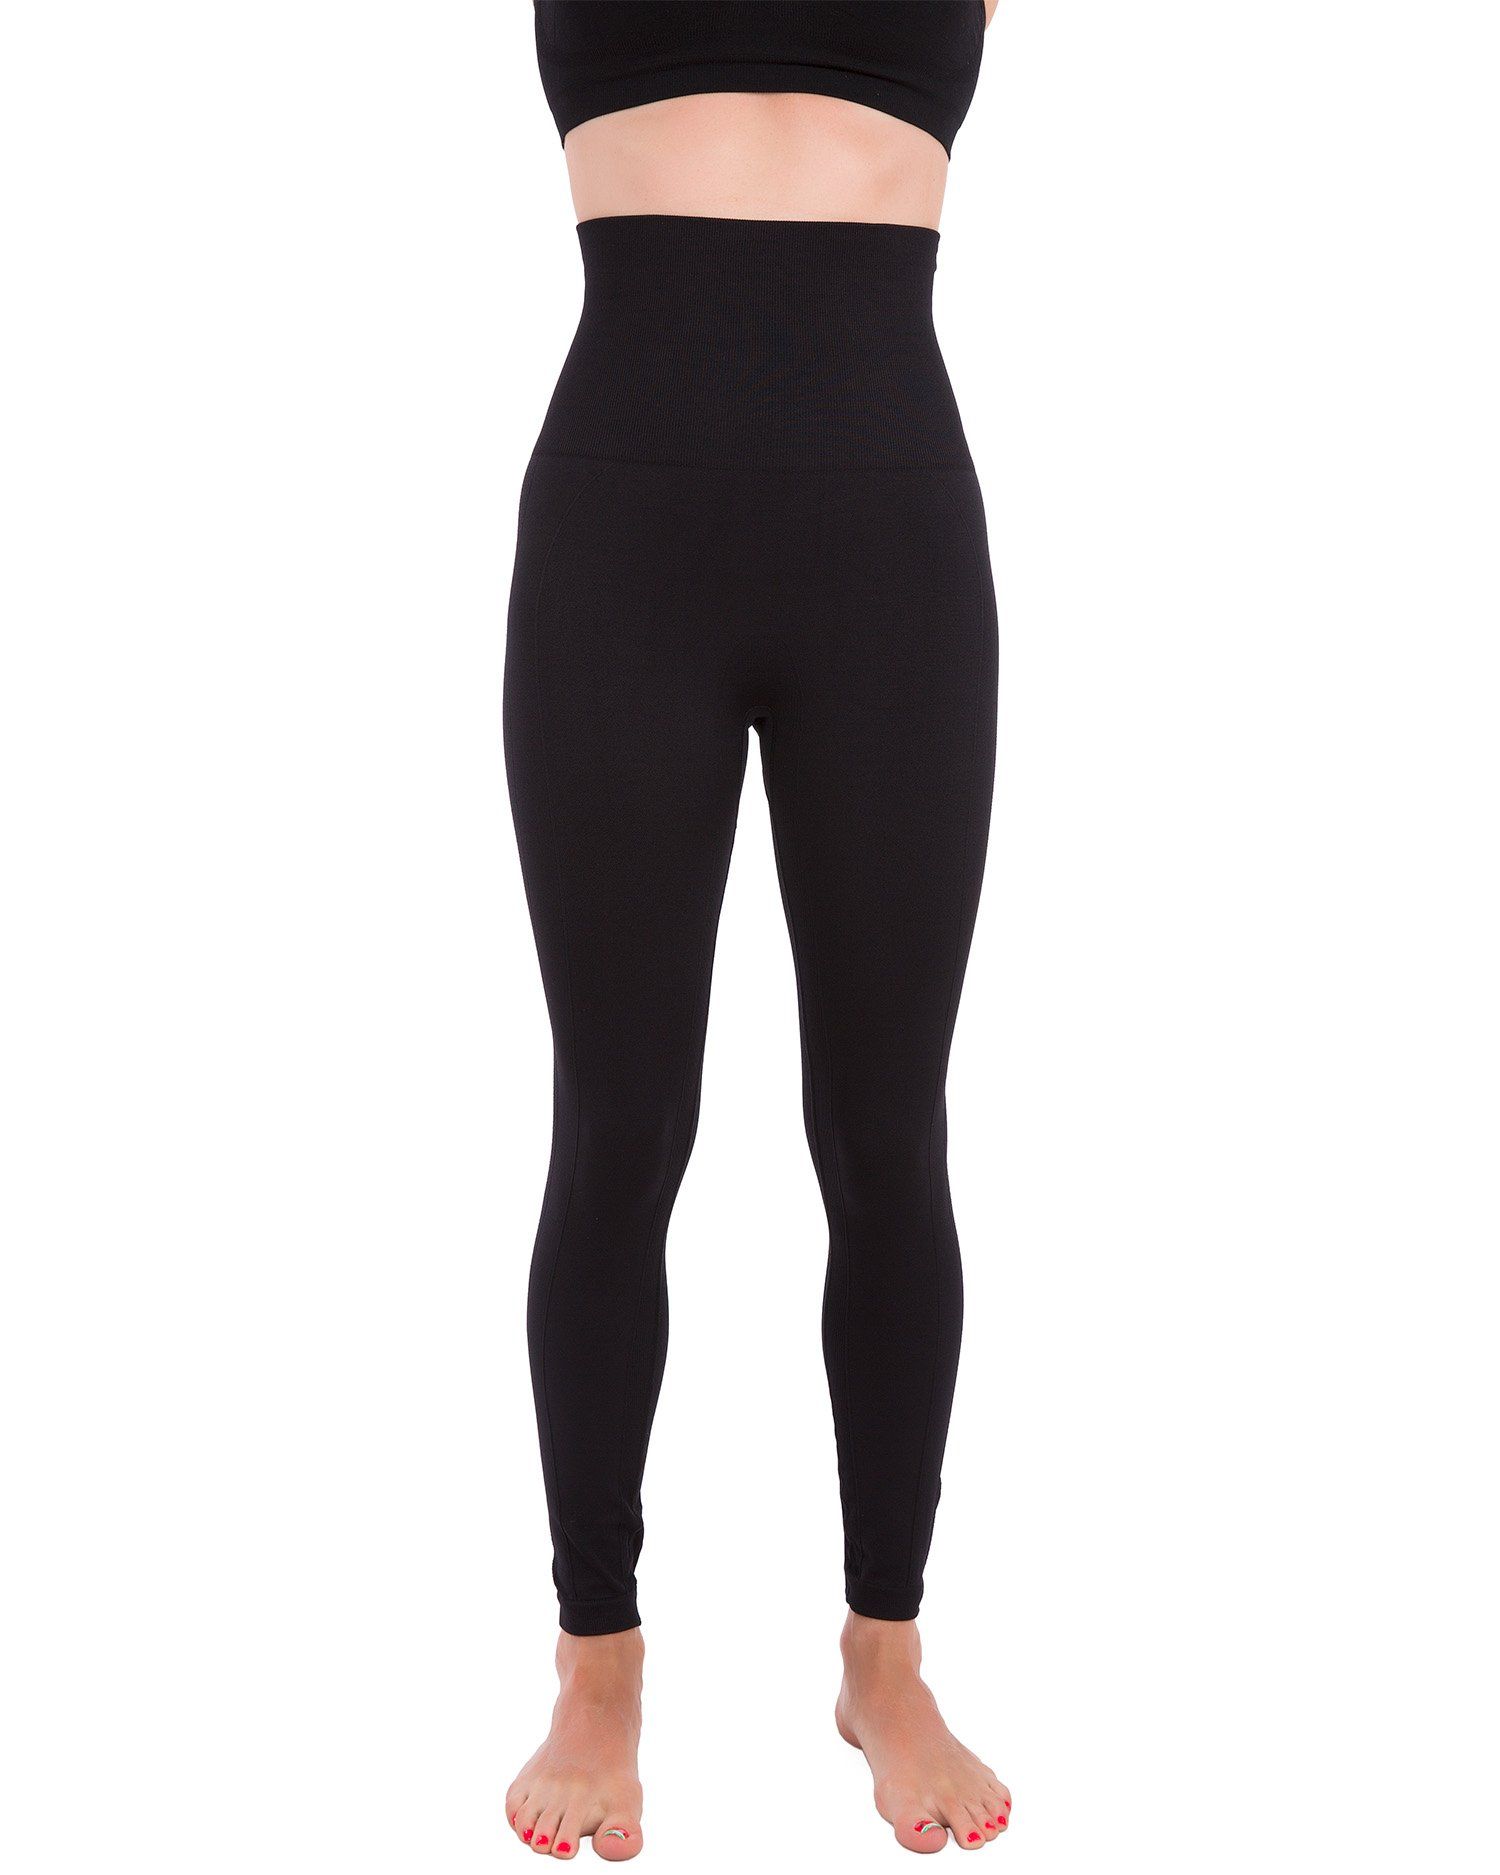 12 Best Compression Leggings For Workouts In 2023 | body+soul